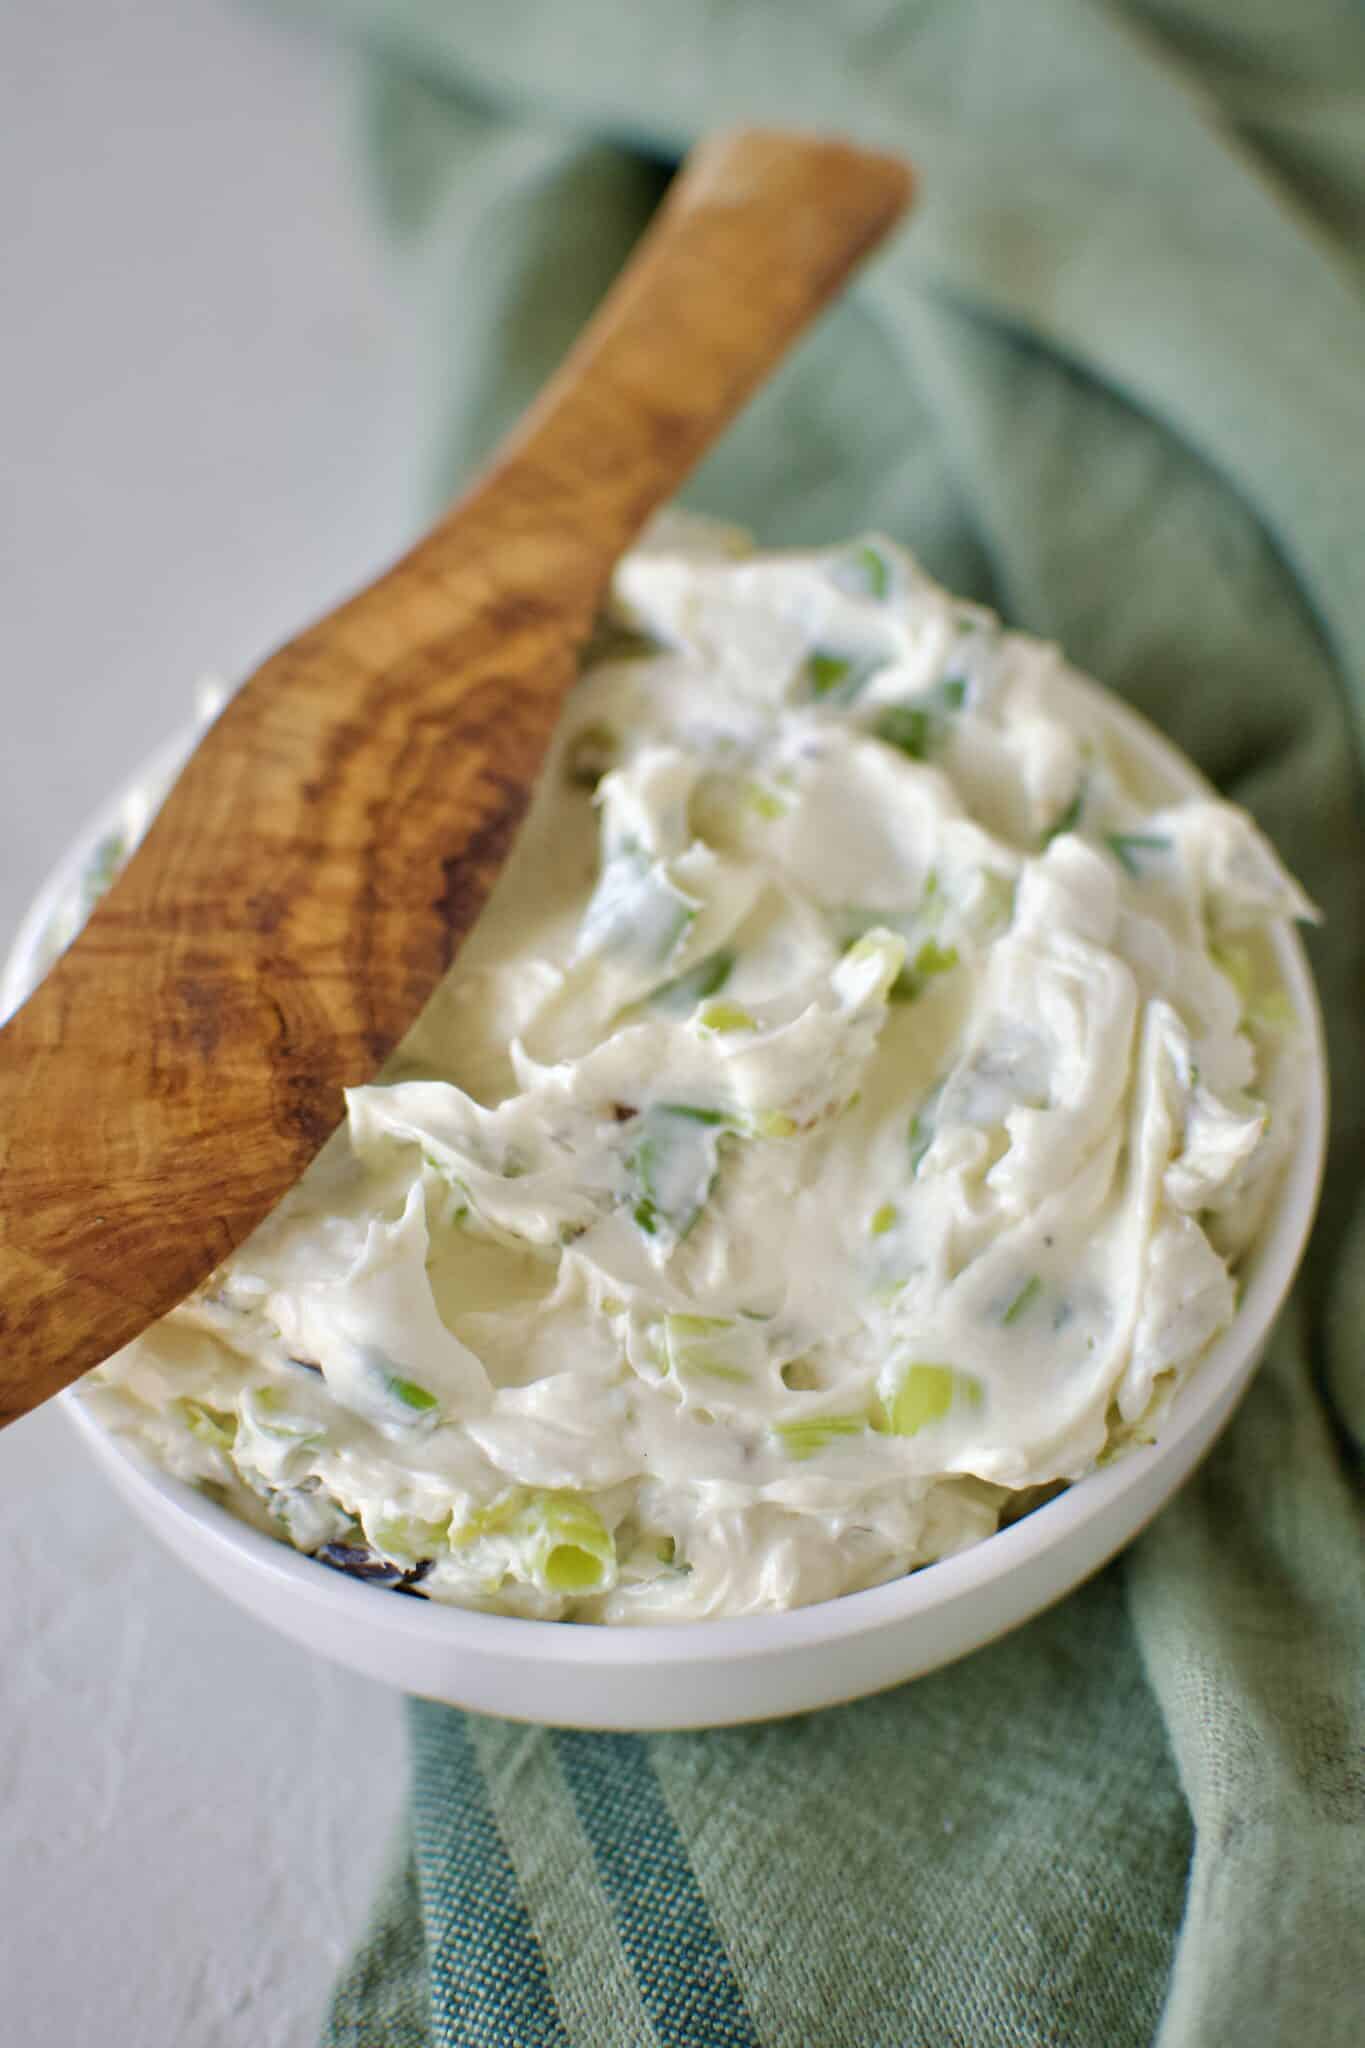 Finished scallion cream cheese in a dish ready to eat. With a wood spreading knife resting on the side.